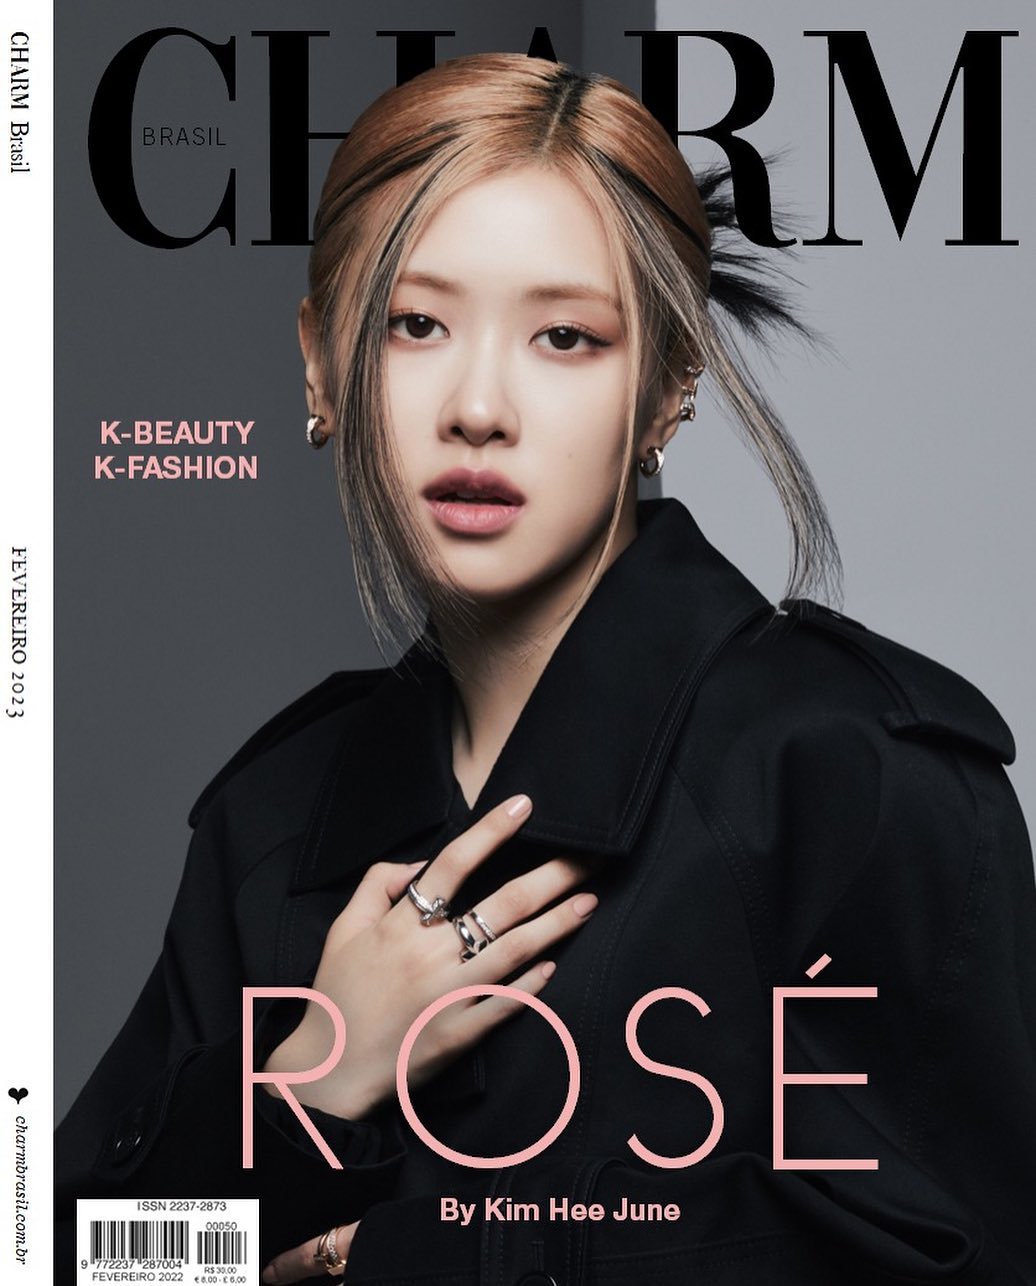 BLACKPINK Global News on X: #ROSÉ for the cover of CHARM Brazil